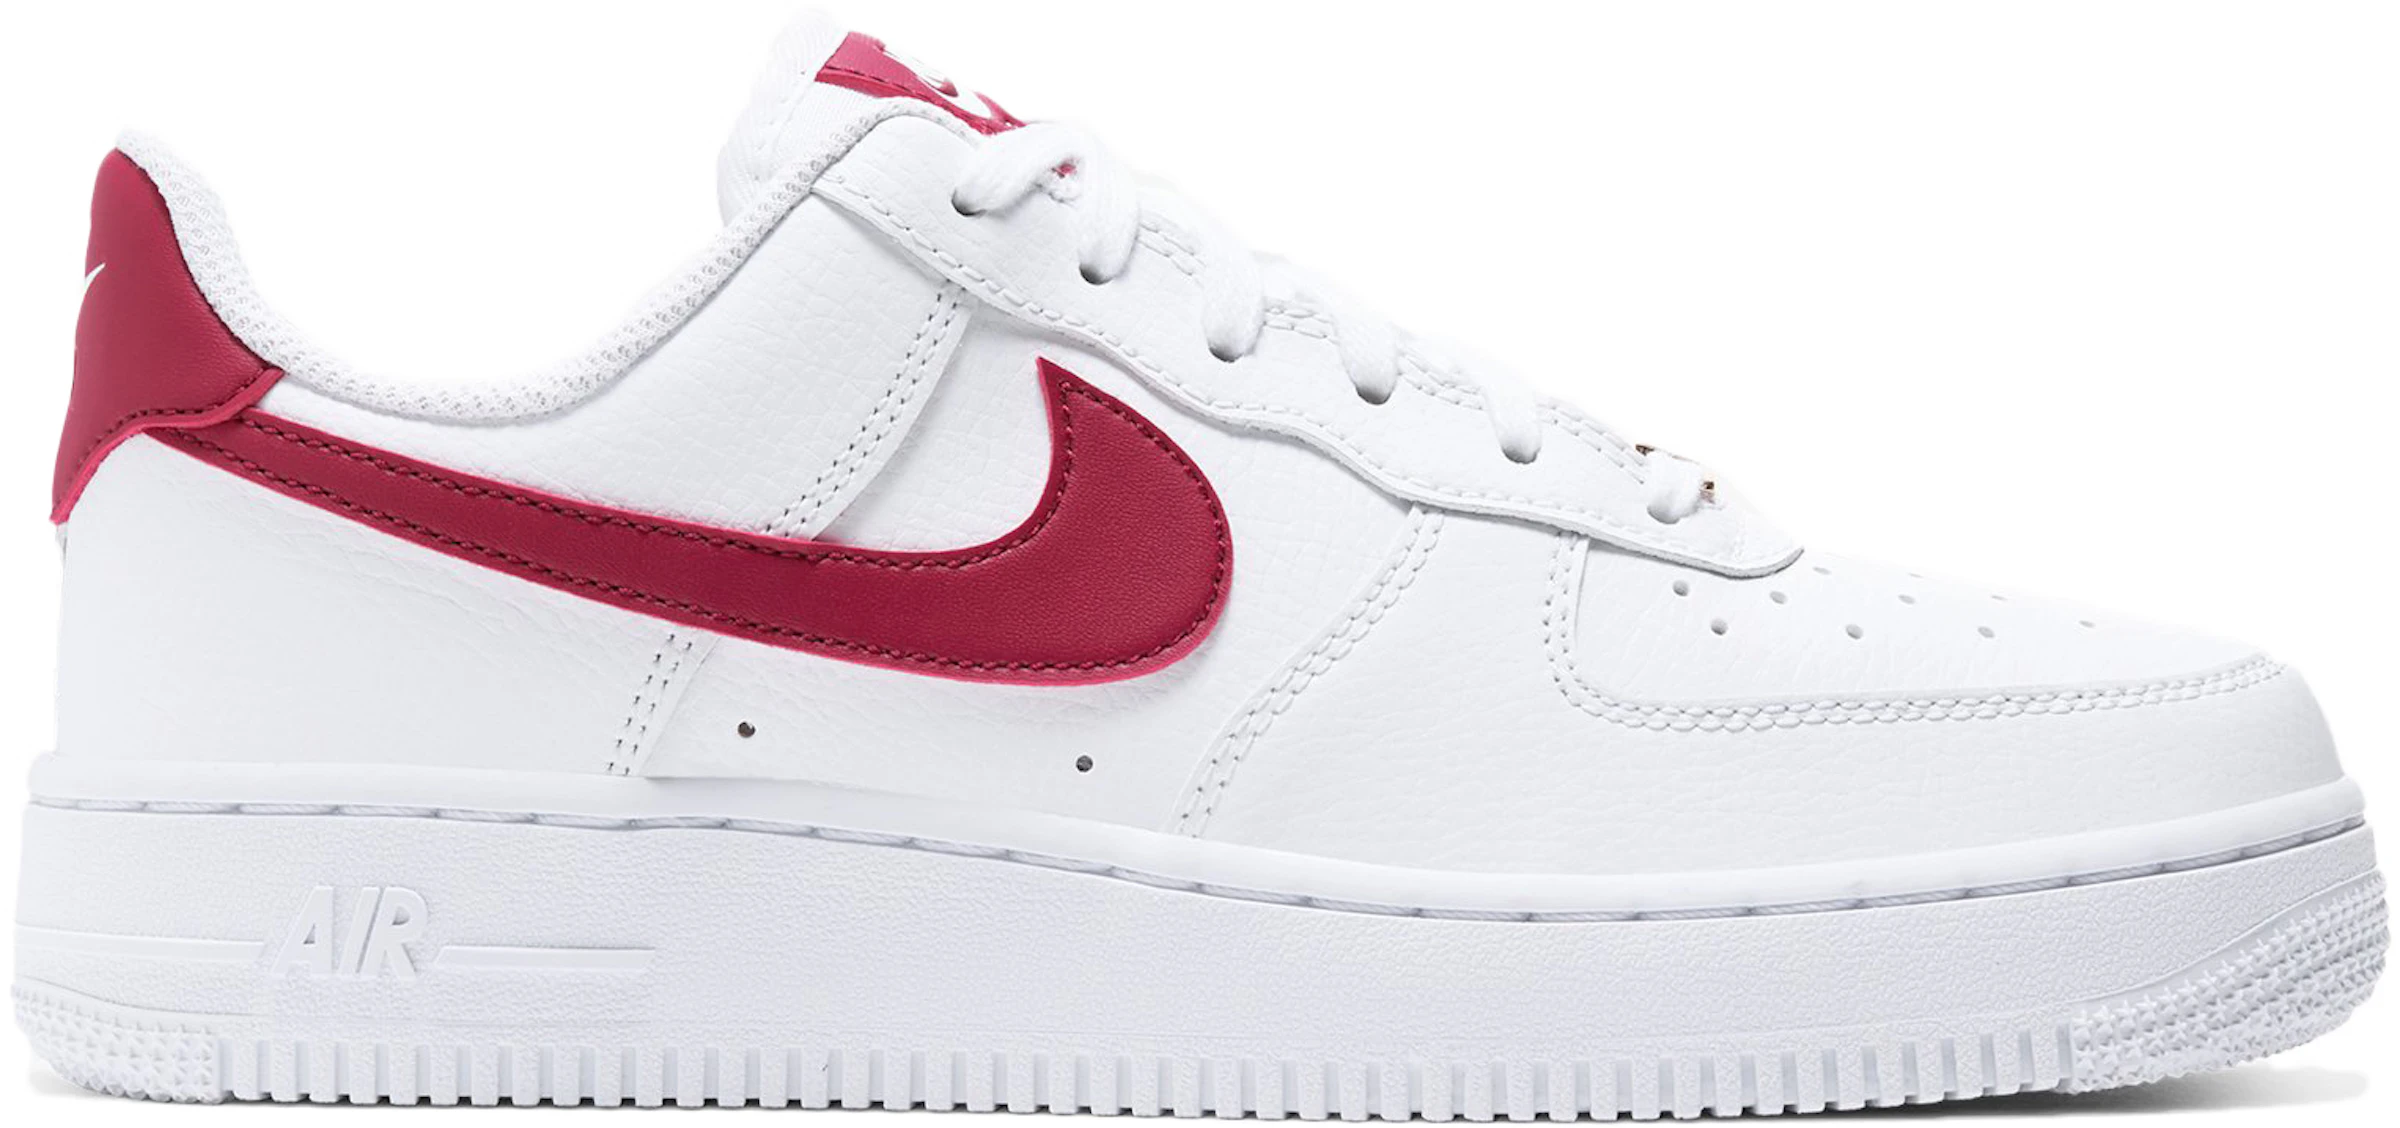 Air Force 1 White Noble Red (Women's) - 315115-154 -